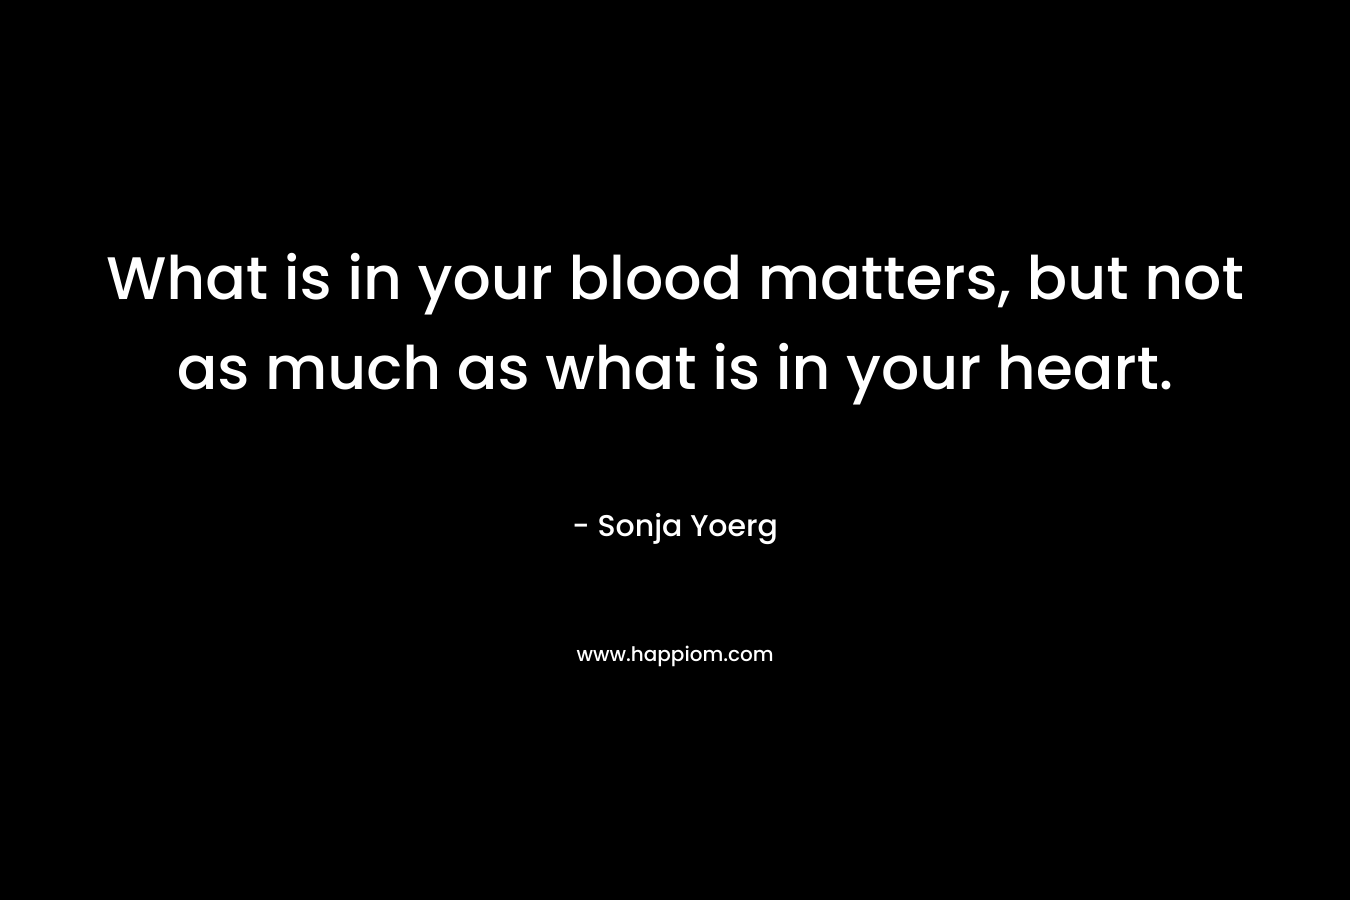 What is in your blood matters, but not as much as what is in your heart. – Sonja Yoerg